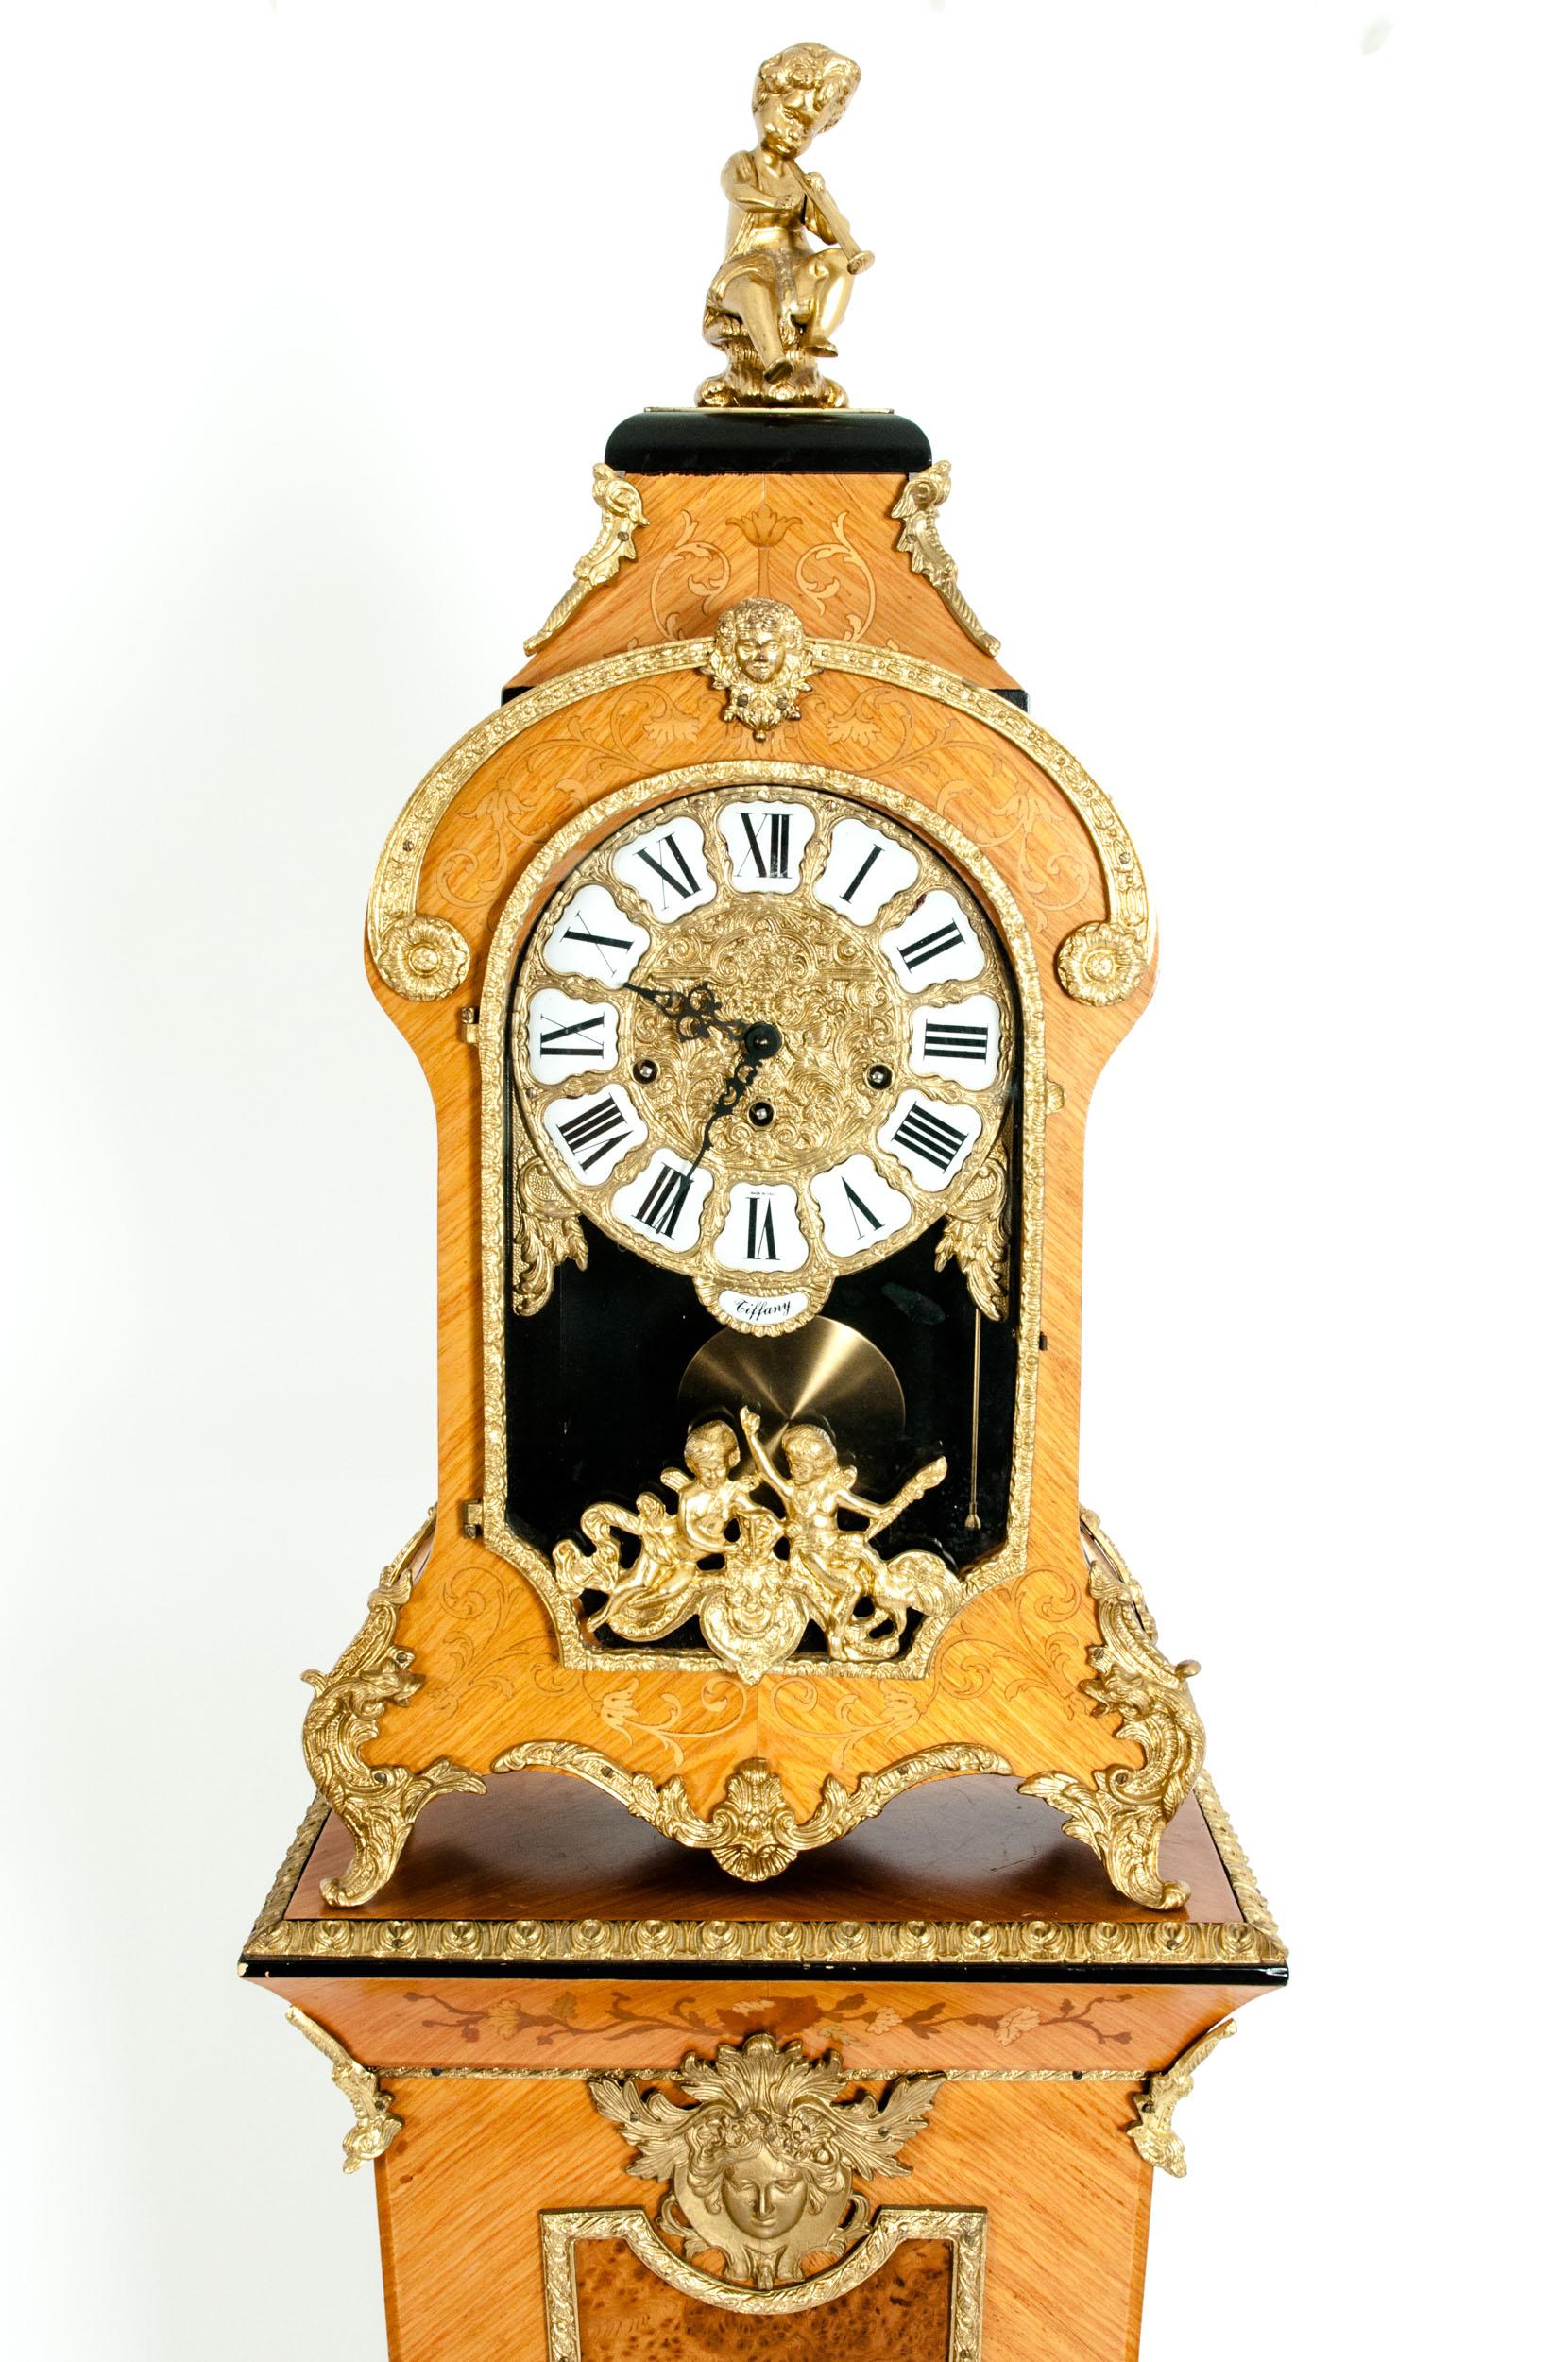 20th century fruitwood veneer case with inlaid floral motif details with bronze mounted design Tiffany mantel clock with pedestal. The clock was created in Italy with German movements. The clock is in excellent condition with appropriate wear